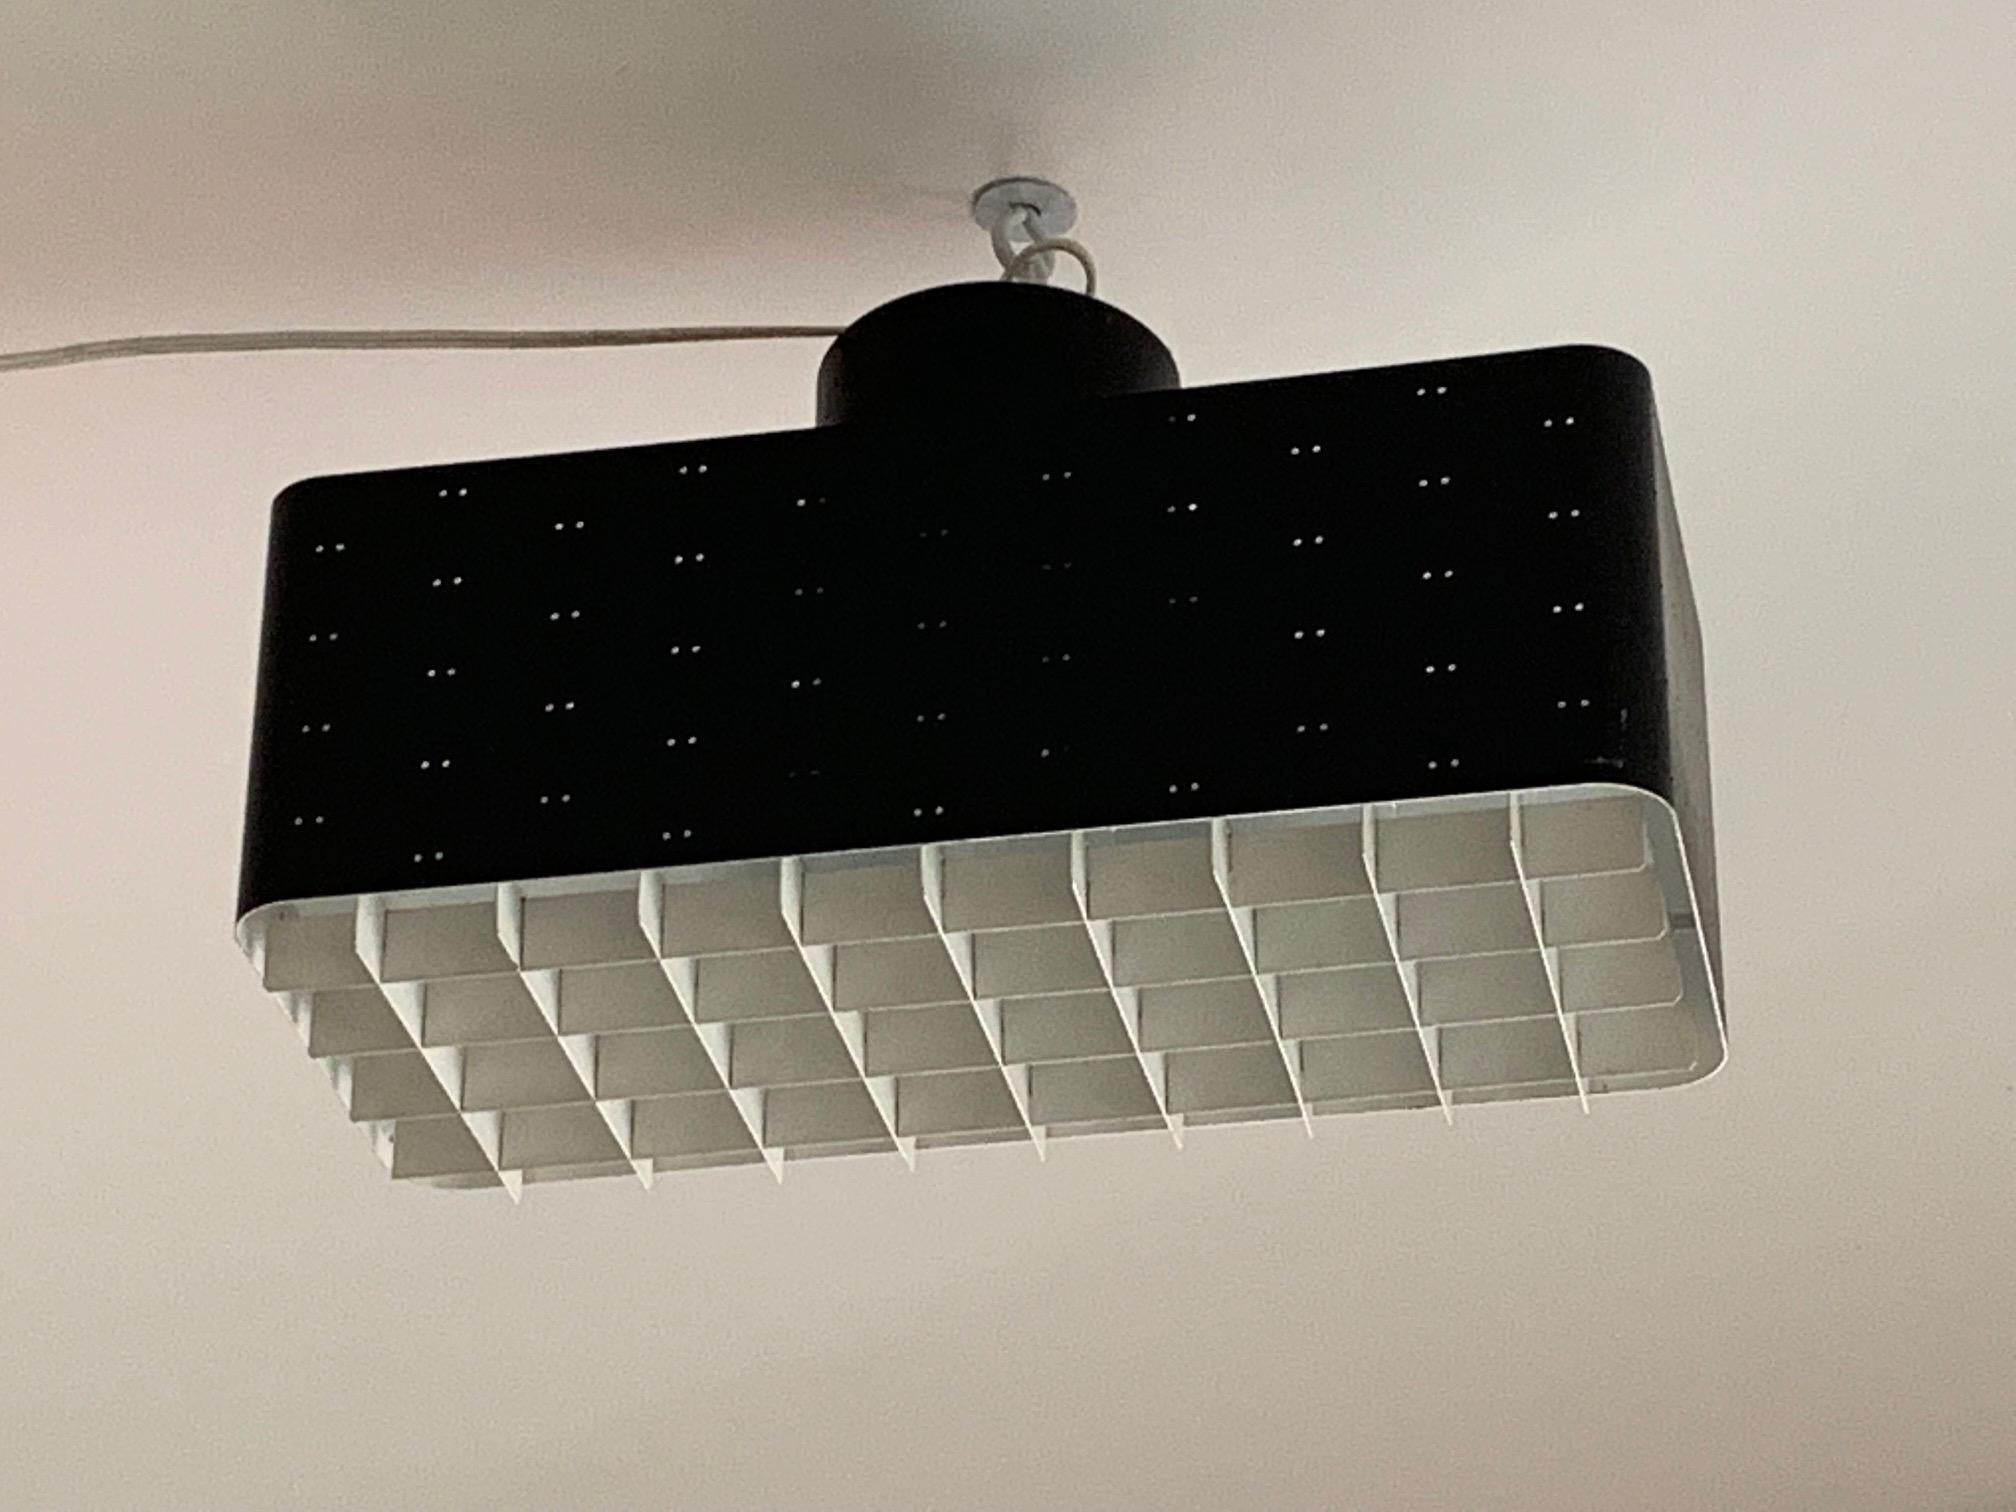 A rare Paavo Tynell 9068, rectangular light in original black/white color configuration. Flush mount with twin portholes allowing a beautyful light projection. Added by a white grid and glass diffuser. Manufactured by Idman, this example is a real